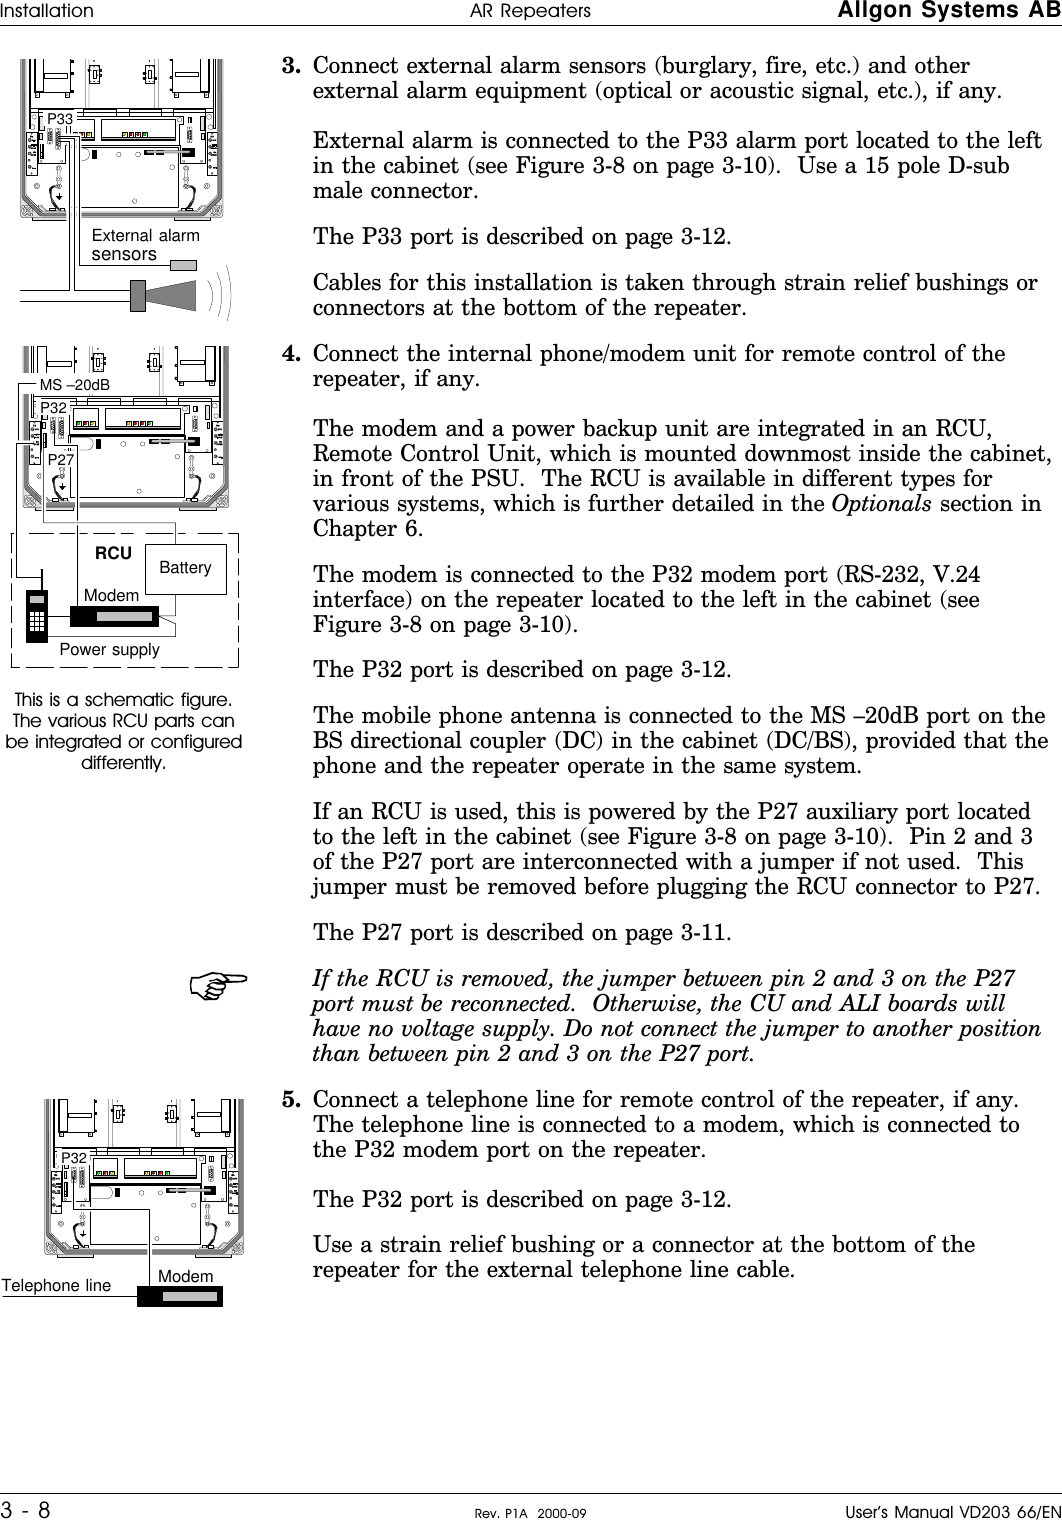 3. Connect external alarm sensors (burglary, fire, etc.) and otherexternal alarm equipment (optical or acoustic signal, etc.), if any.    External alarm is connected to the P33 alarm port located to the leftin the cabinet (see Figure 3-8 on page 3-10).  Use a 15 pole D-submale connector.The P33 port is described on page 3-12.Cables for this installation is taken through strain relief bushings orconnectors at the bottom of the repeater.This is a schematic figure.The various RCU parts canbe integrated or configureddifferently.4. Connect the internal phone/modem unit for remote control of therepeater, if any.      The modem and a power backup unit are integrated in an RCU,Remote Control Unit, which is mounted downmost inside the cabinet,in front of the PSU.  The RCU is available in different types forvarious systems, which is further detailed in the Optionals section inChapter 6.The modem is connected to the P32 modem port (RS-232, V.24interface) on the repeater located to the left in the cabinet (seeFigure 3-8 on page 3-10).The P32 port is described on page 3-12.The mobile phone antenna is connected to the MS –20dB port on theBS directional coupler (DC) in the cabinet (DC/BS), provided that thephone and the repeater operate in the same system.If an RCU is used, this is powered by the P27 auxiliary port locatedto the left in the cabinet (see Figure 3-8 on page 3-10).  Pin 2 and 3of the P27 port are interconnected with a jumper if not used.  Thisjumper must be removed before plugging the RCU connector to P27.The P27 port is described on page 3-11.If the RCU is removed, the jumper between pin 2 and 3 on the P27port must be reconnected.  Otherwise, the CU and ALI boards willhave no voltage supply. Do not connect the jumper to another positionthan between pin 2 and 3 on the P27 port.5. Connect a telephone line for remote control of the repeater, if any.The telephone line is connected to a modem, which is connected tothe P32 modem port on the repeater. The P32 port is described on page 3-12.Use a strain relief bushing or a connector at the bottom of therepeater for the external telephone line cable. P33 External alarmsensors P32  P27RCU MS –20dB ModemBatteryPower supply P32 Telephone line ModemInstallation AR Repeaters Allgon Systems AB3 - 8 Rev. P1A  2000-09 User’s Manual VD203 66/EN